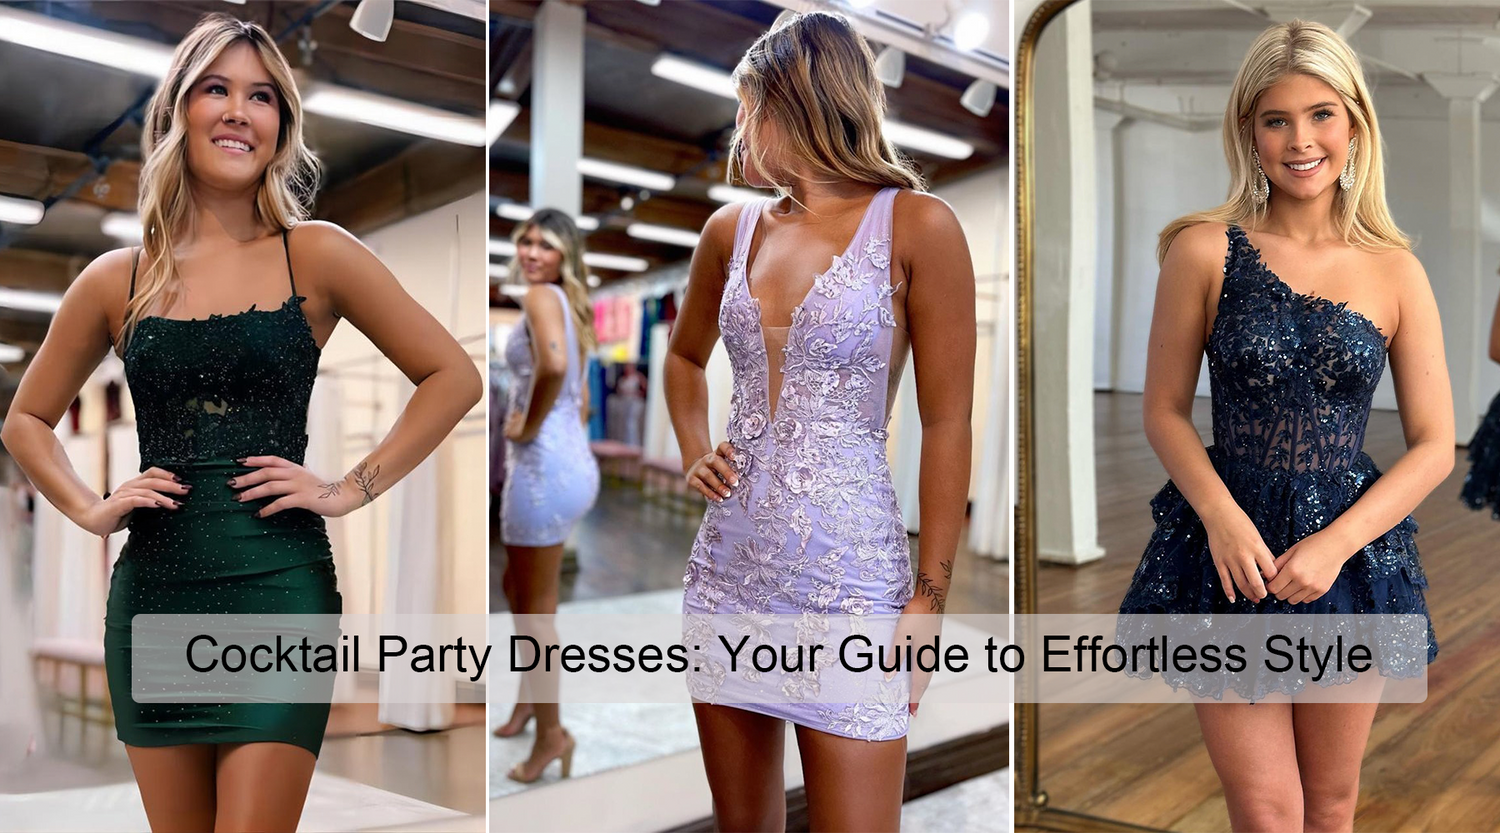 Cocktail Party Dresses: Your Guide to Effortless Style